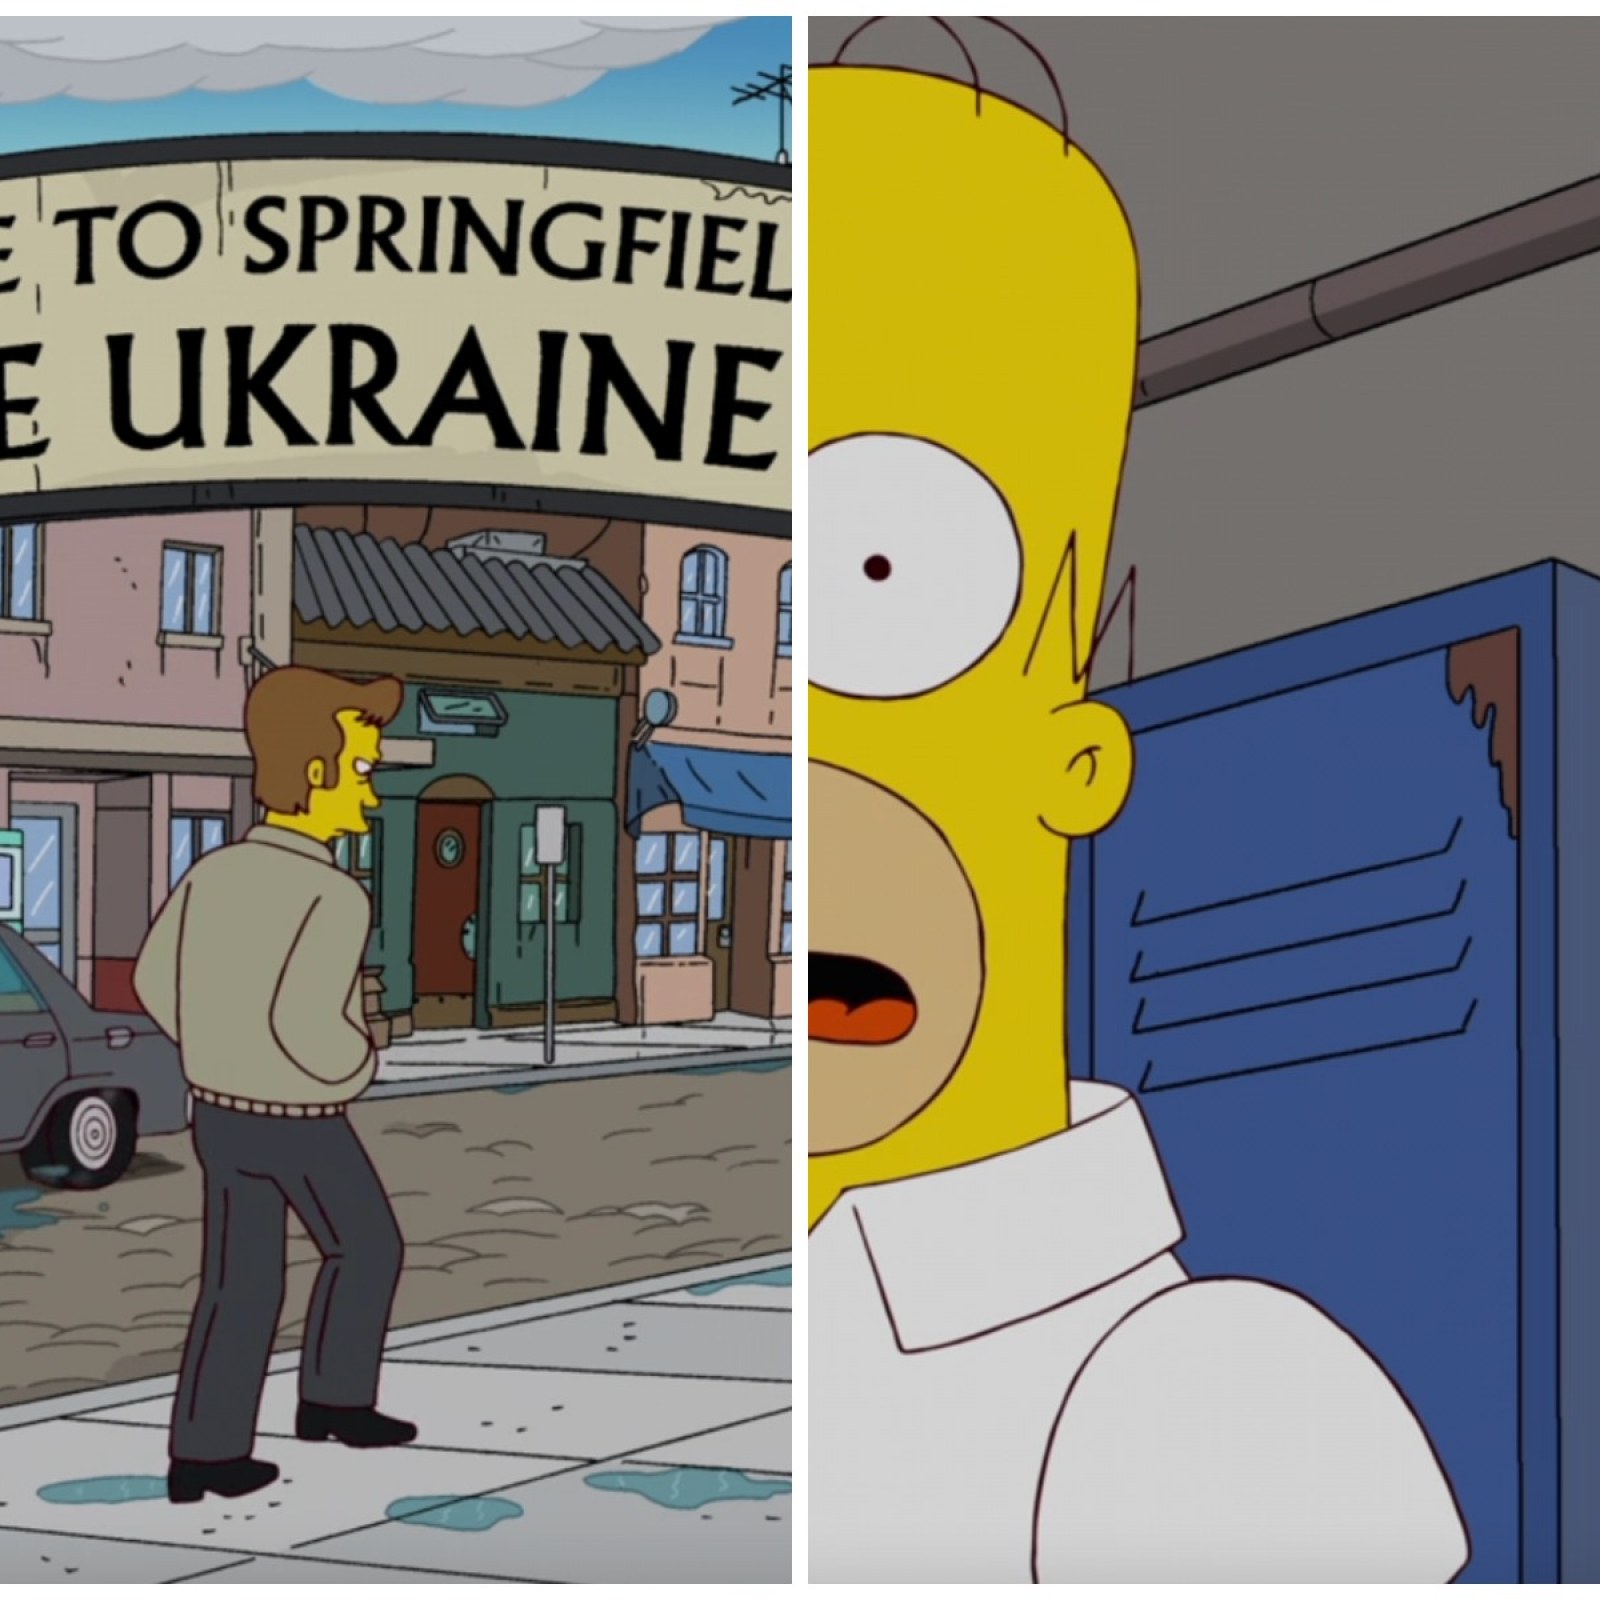 Did 'The Simpsons' Predict the Ukrainian Refugee Crisis?